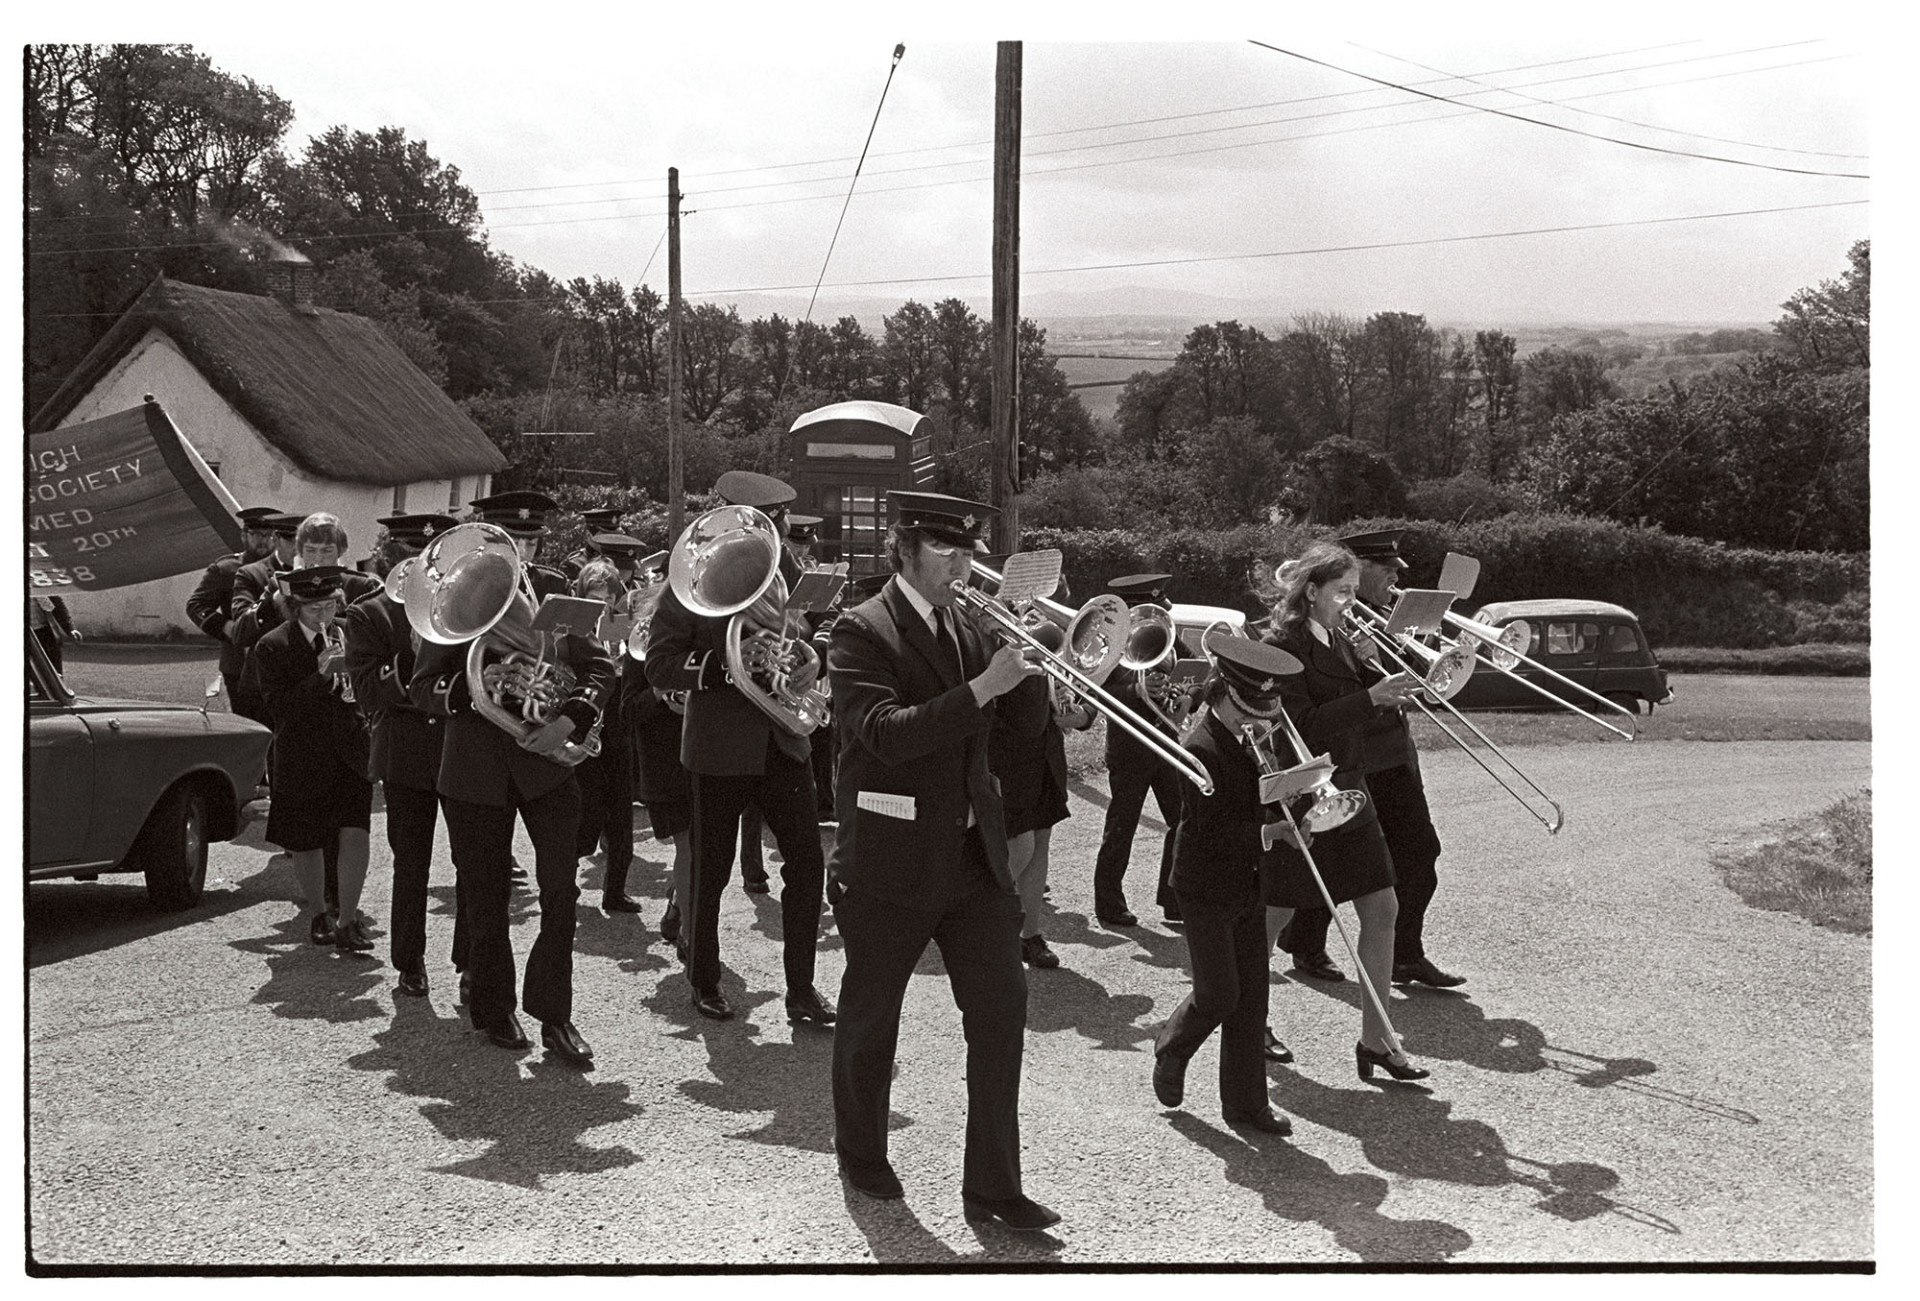 Friendly Society start of parade with Silver Band.
[Hatherleigh Silver Band marching up a road in Iddesleigh for Iddesleigh Club Day. People holding the Iddesleigh Friendly Society banner are following them.]